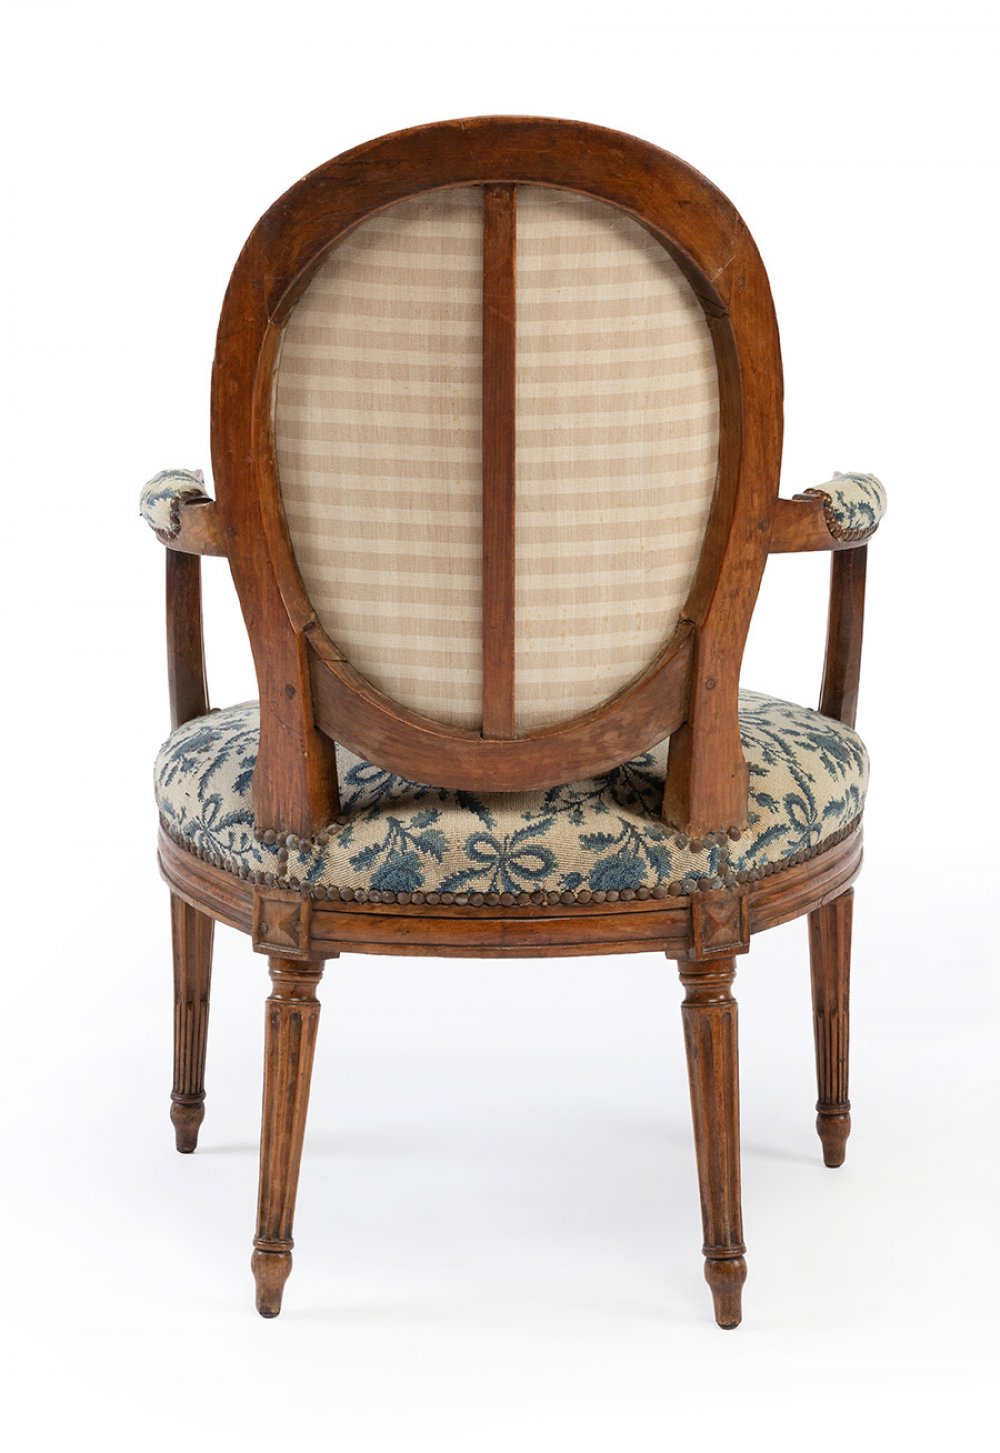 Set of six Louis XVI armchairs, second half of the eighteenth century.Walnut wood. Upholstery with - Image 3 of 7